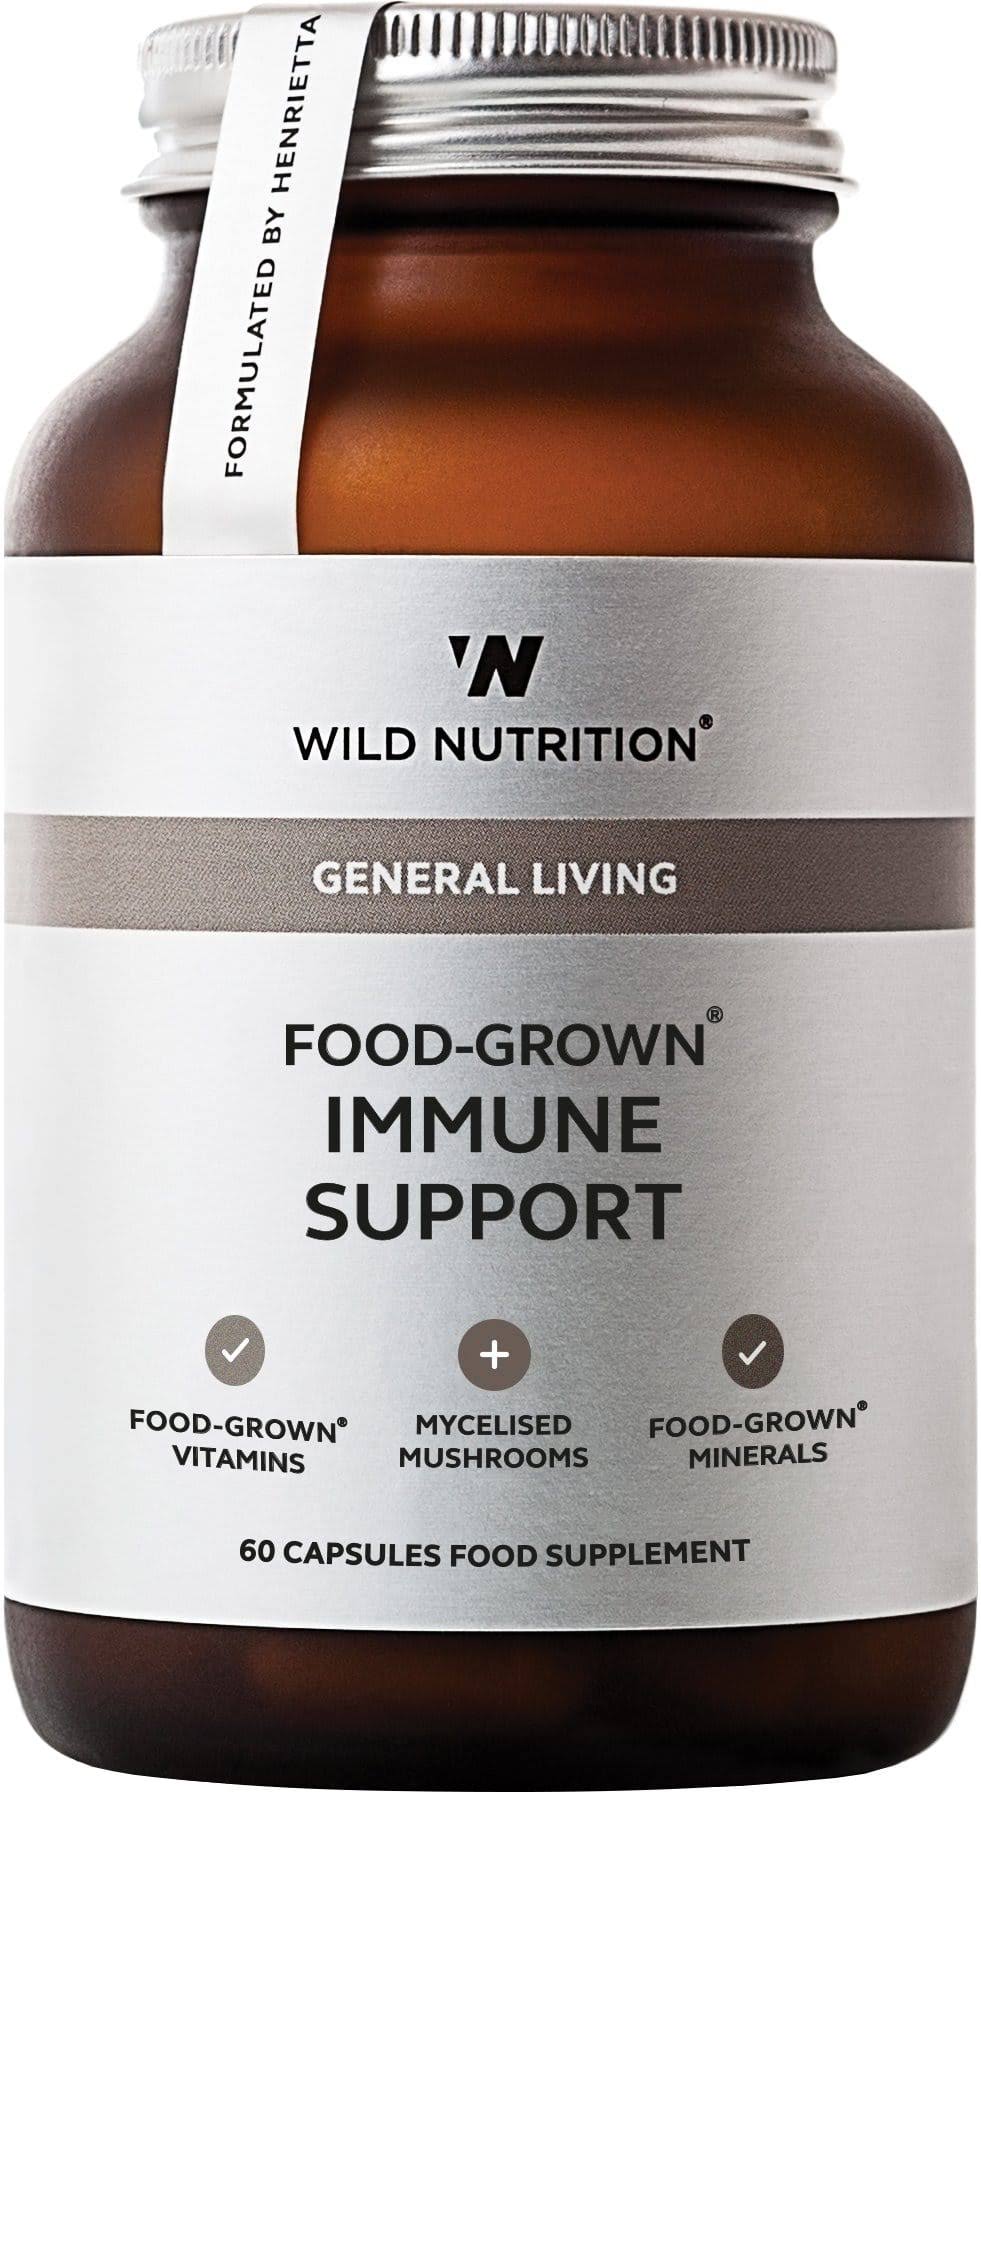 Wild Nutrition - Food-Grown Immune Support - 60 Capsules